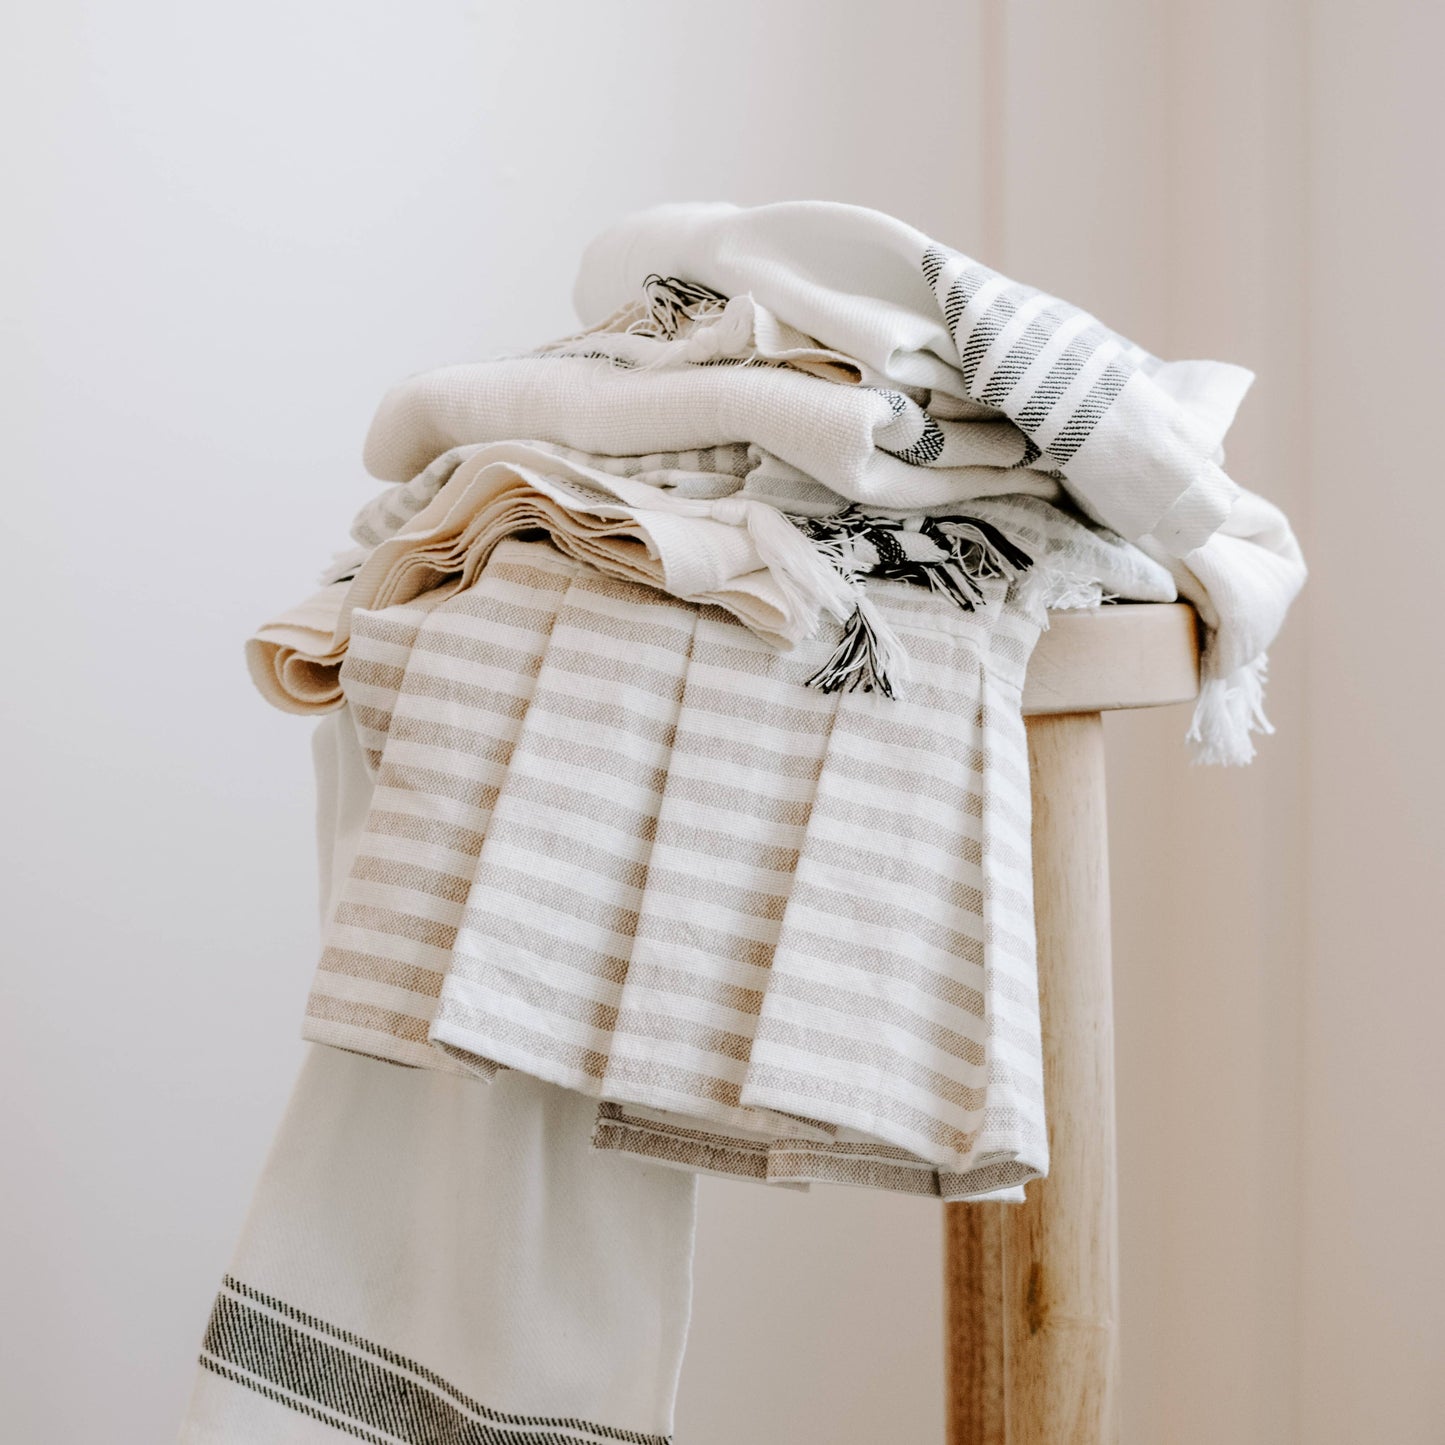 Striped Tea Towel with Ruffle, Grey - Home Decor & Gifts